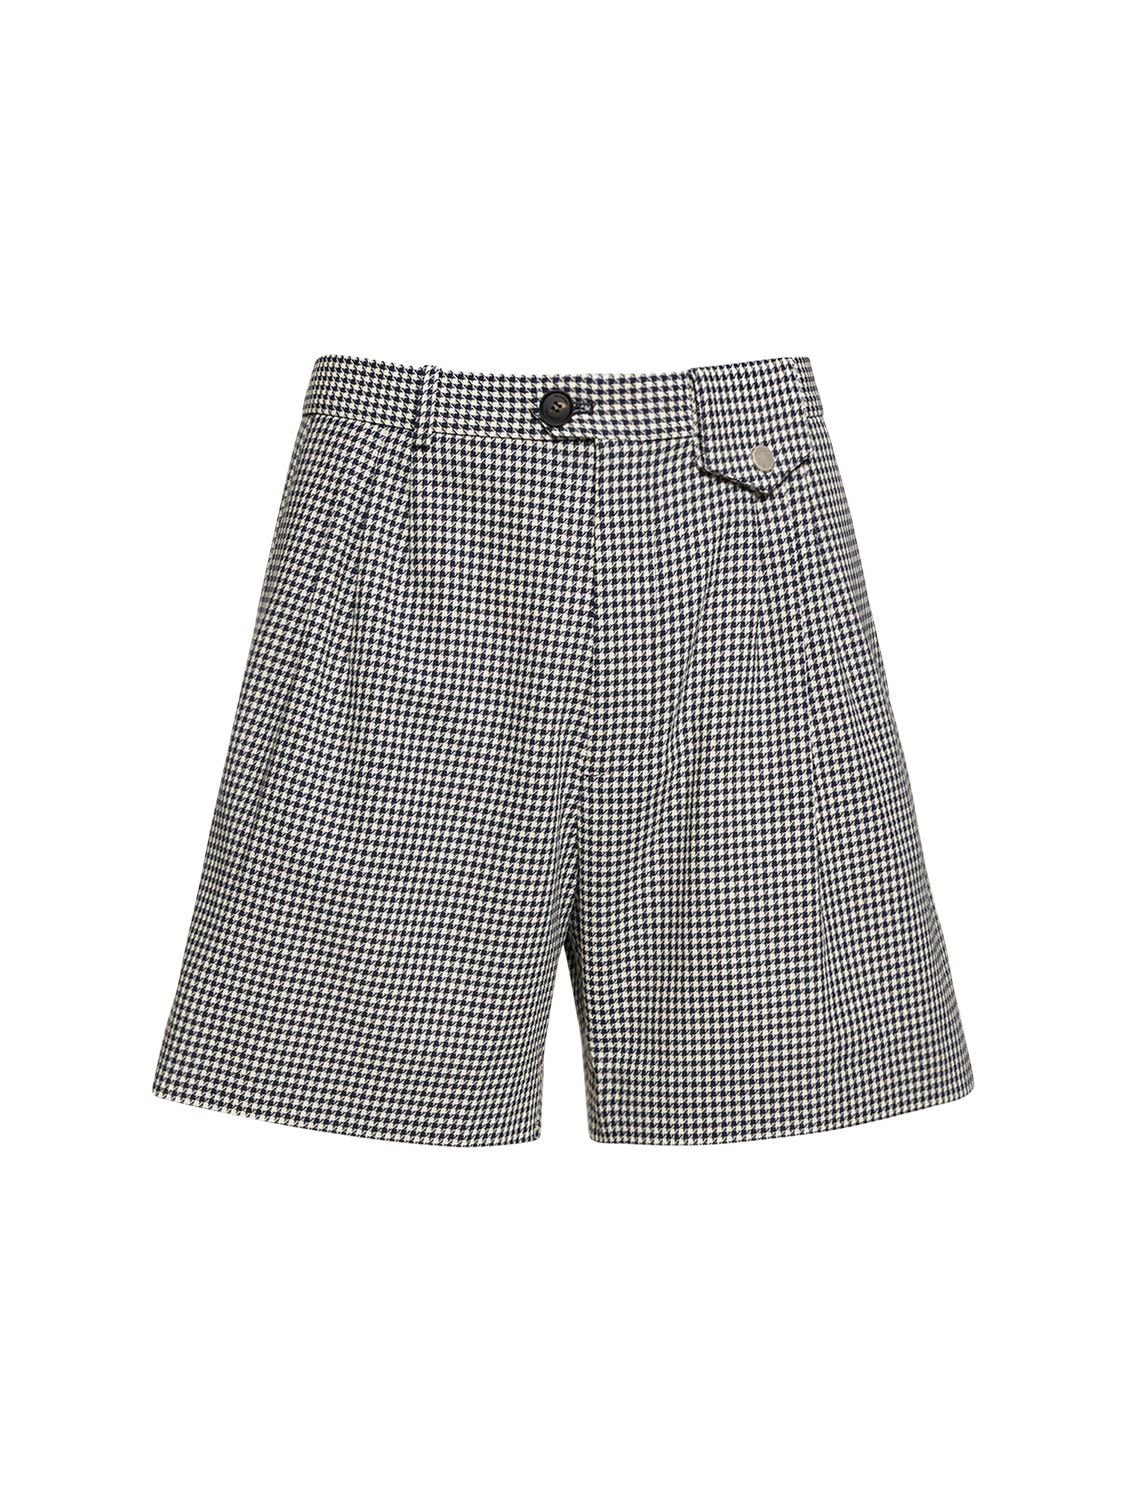 Houndstooth Cotton Shorts